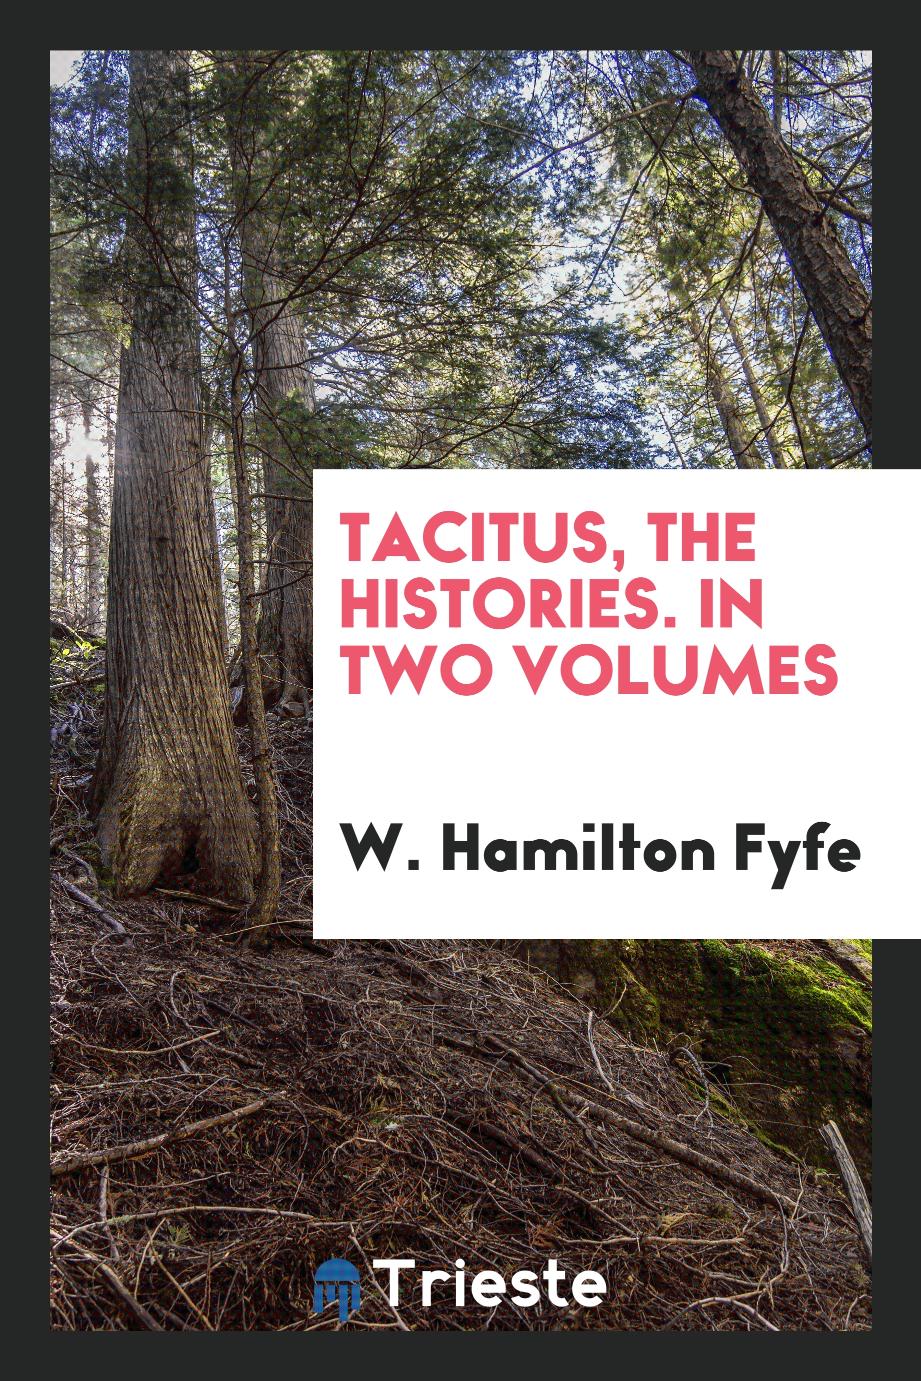 Tacitus, the histories. In two volumes